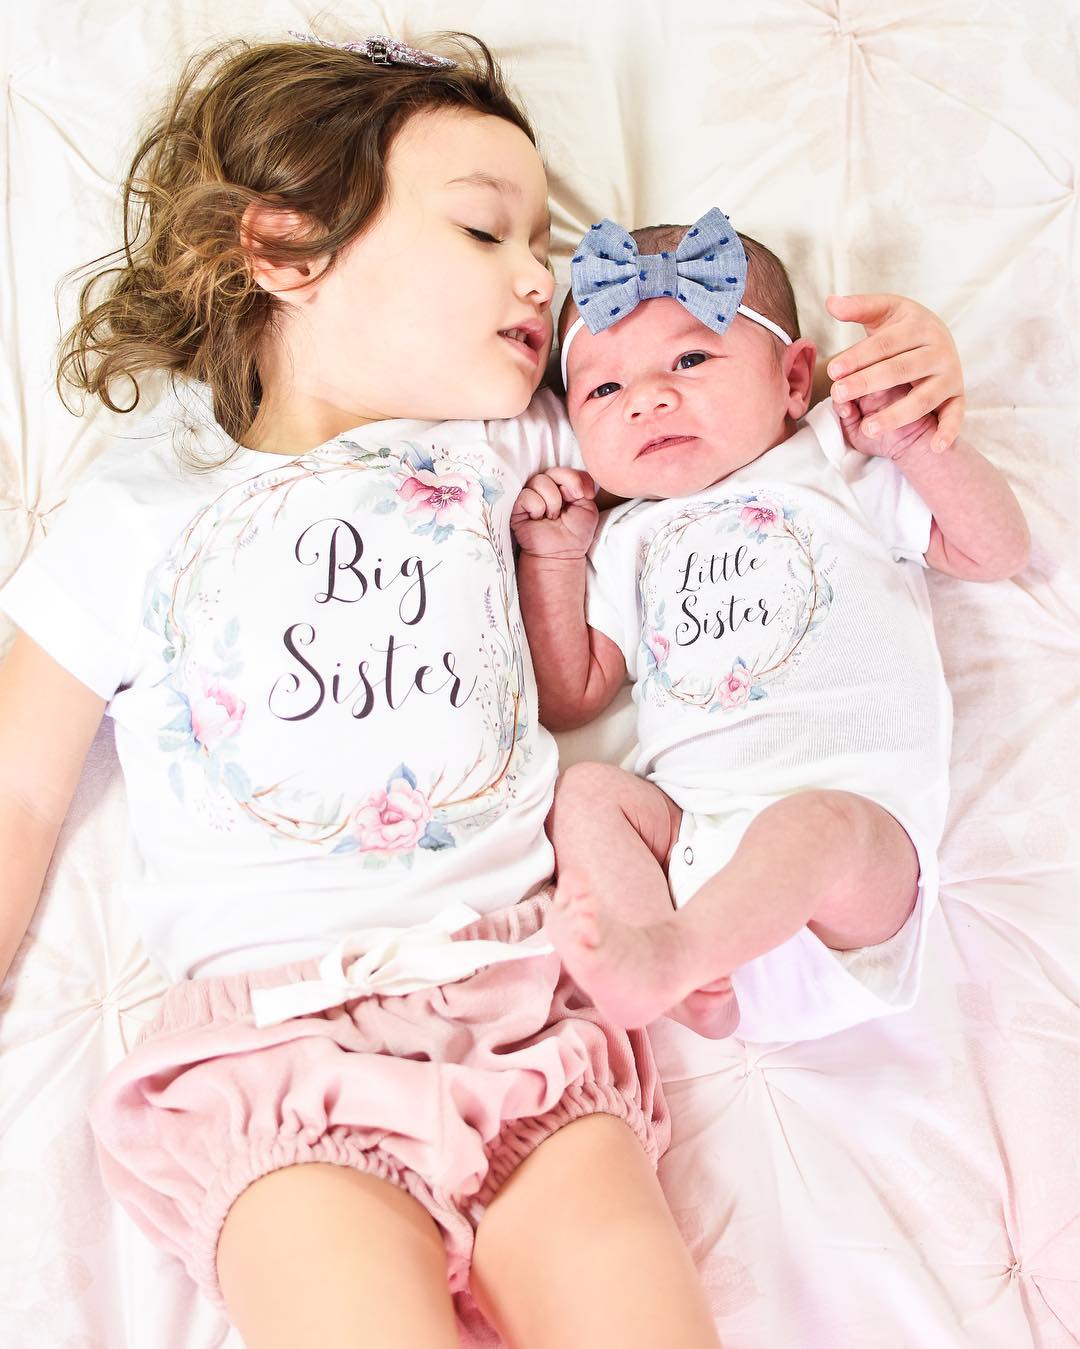 Big Sister Little Sister Matching Cotton Short Sleeve Bodysuit Baby Outfits-Baby Clothing-Free Item Online-Free Item Online